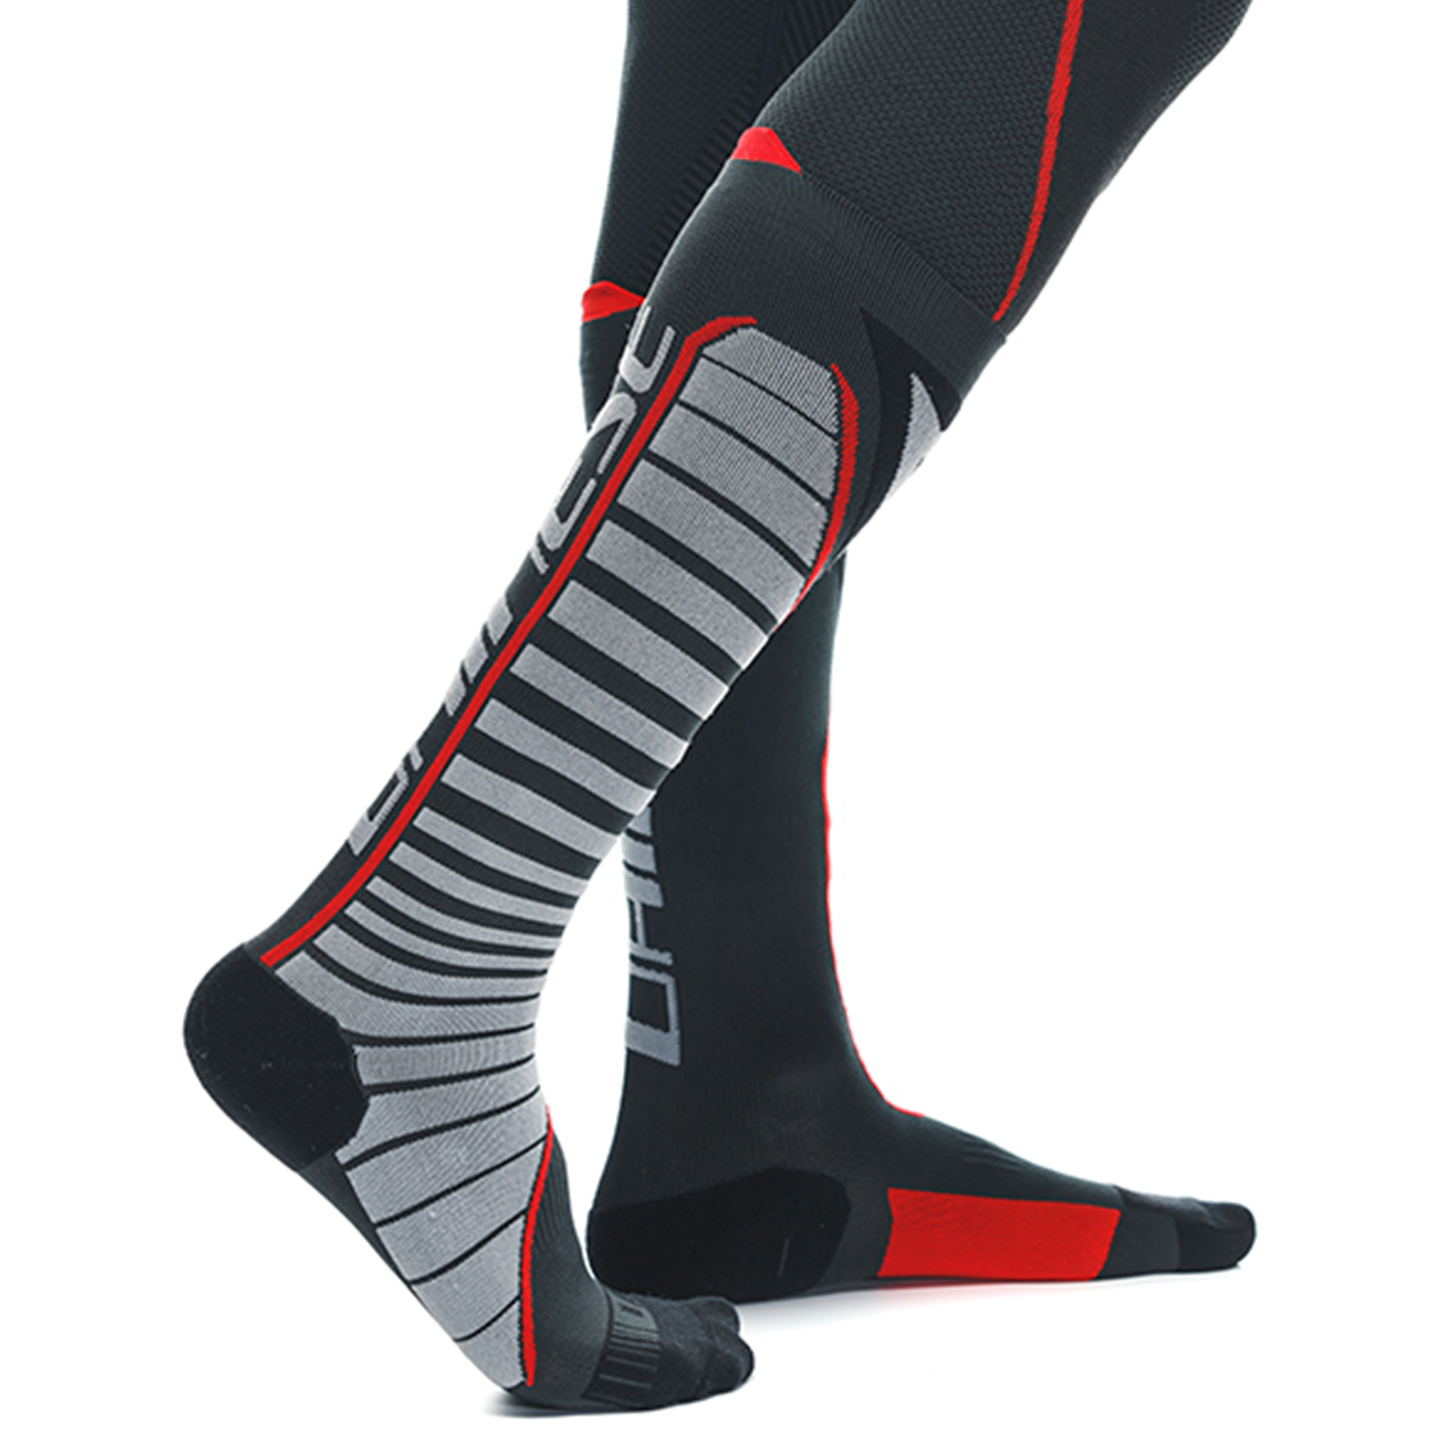 Dainese Thermo Long Socks - Black/Red (606)